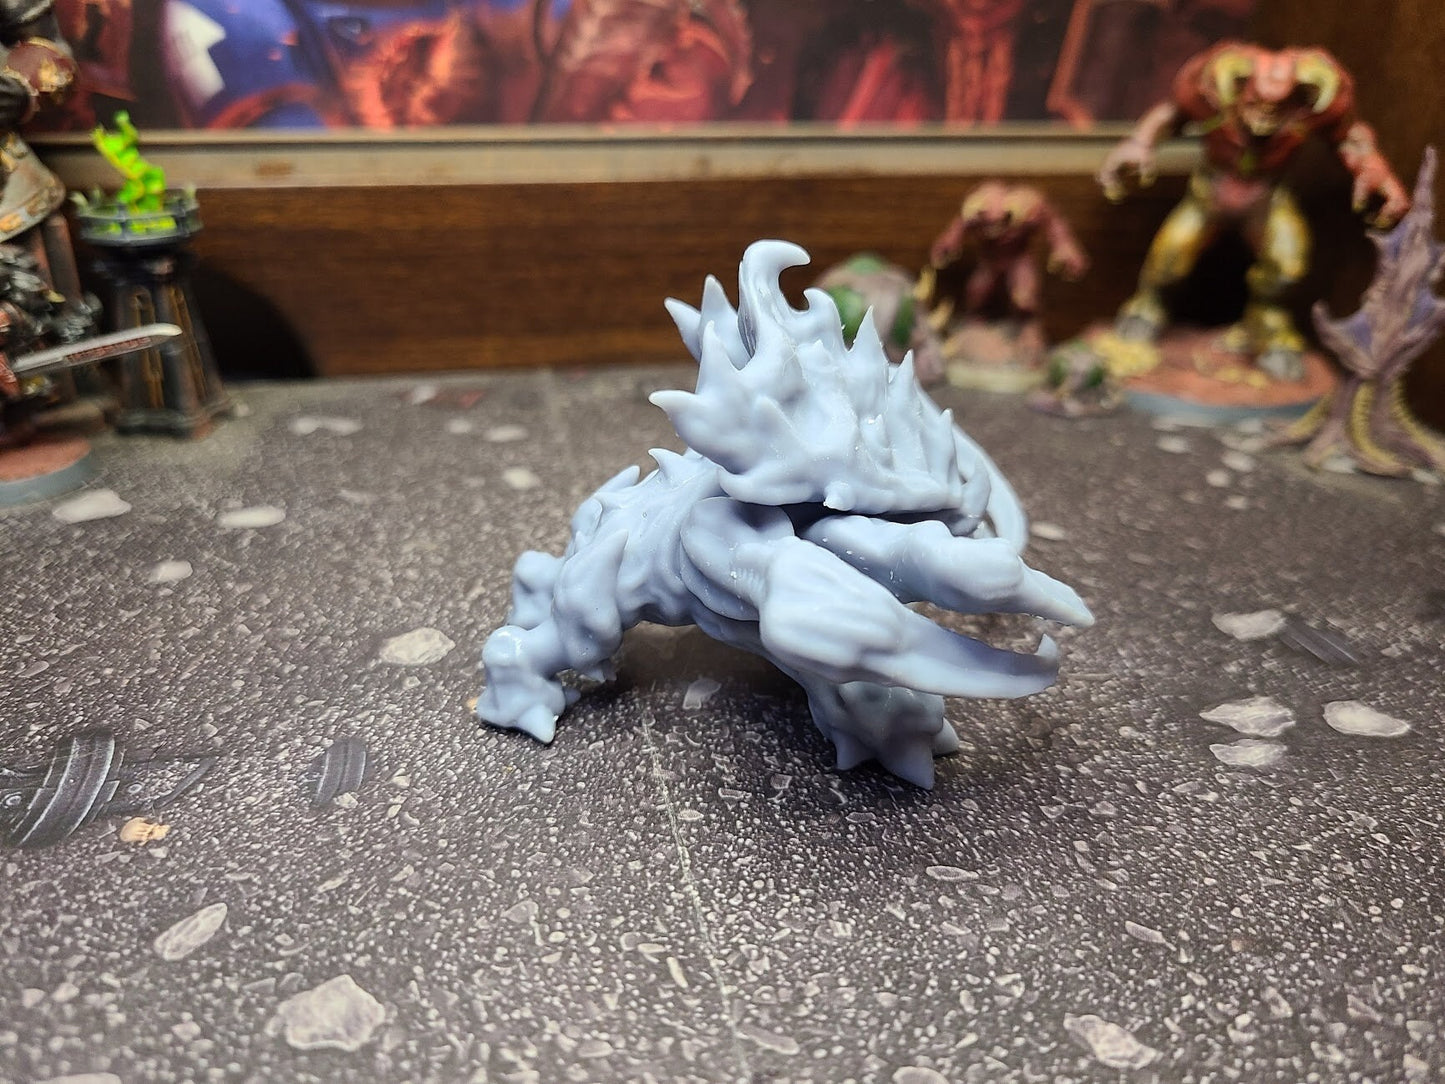 Ultrasaur Miniature, Rescaled for Wargaming (Multiple Sizes) | Tabletop Wargaming Miniatures | 28mm / 6mm Scale